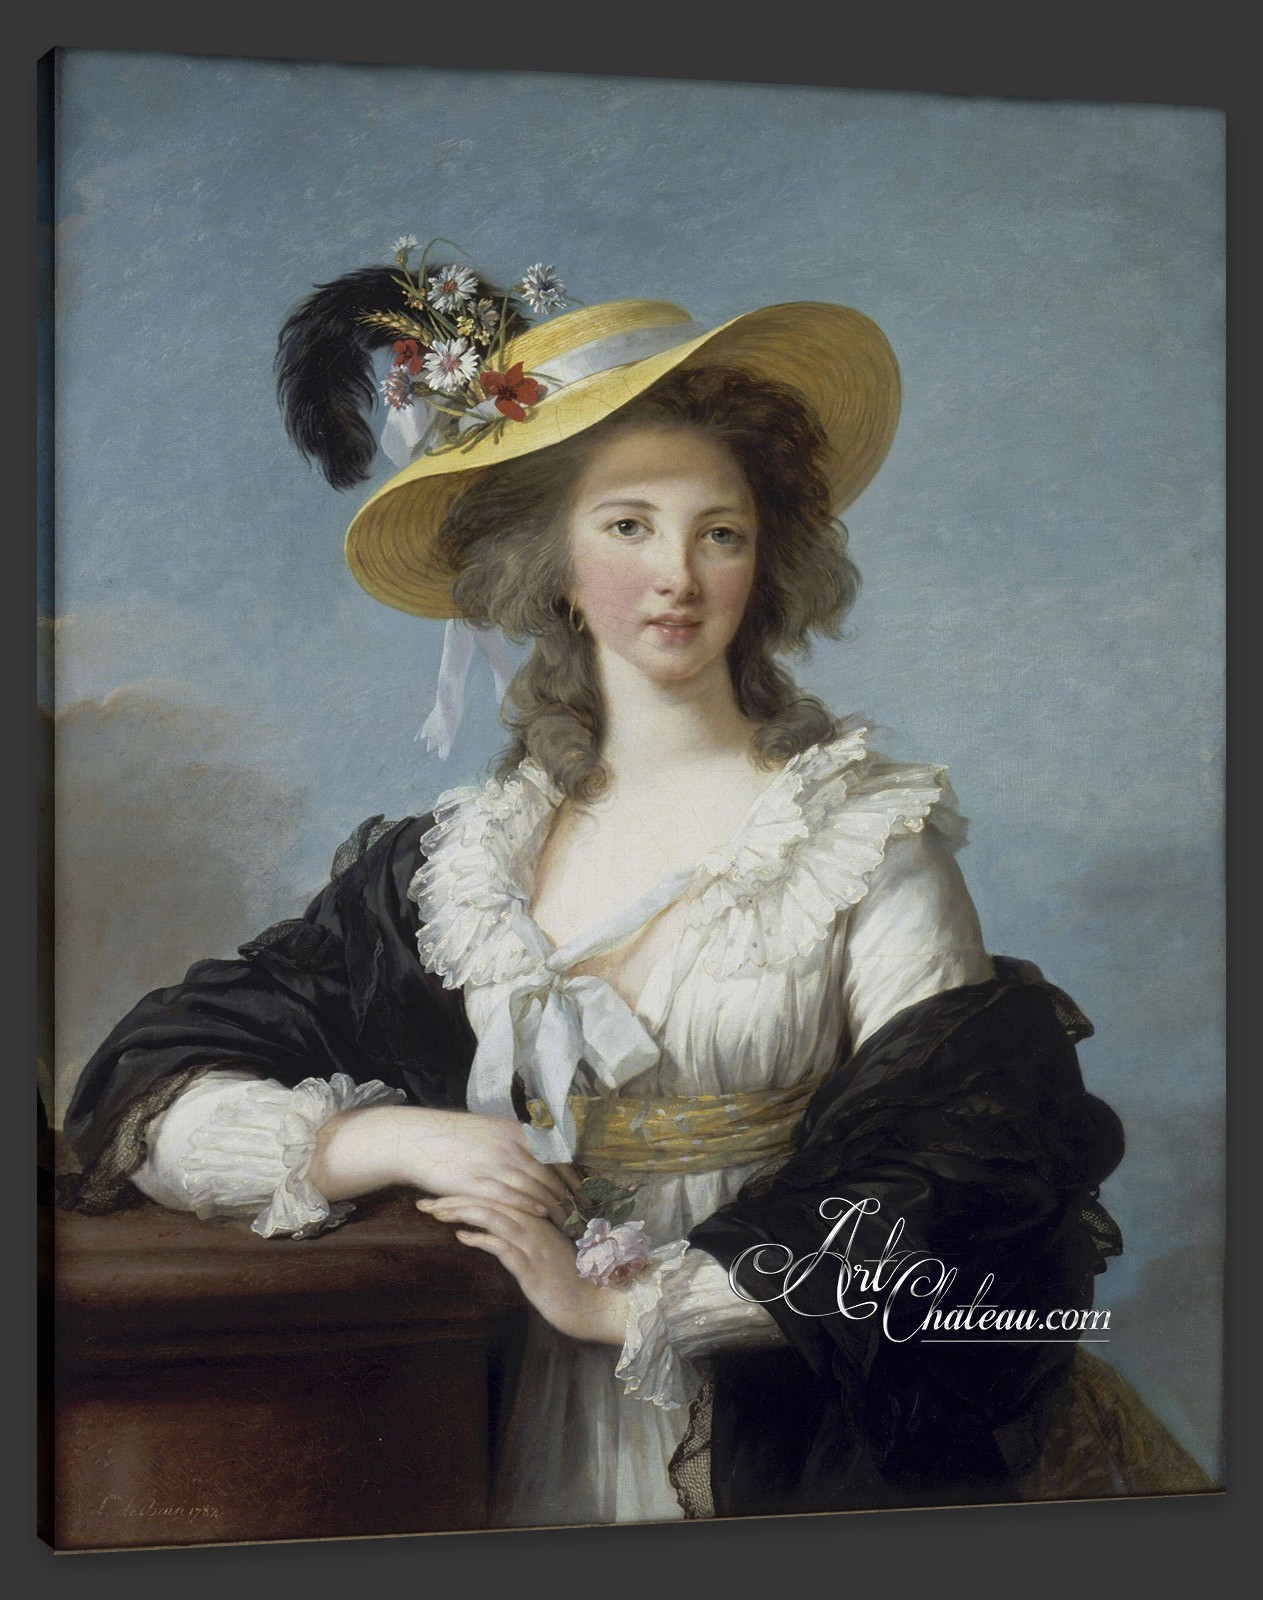 Rococo Painting, after Louise Elisabeth Vigee Le Brun